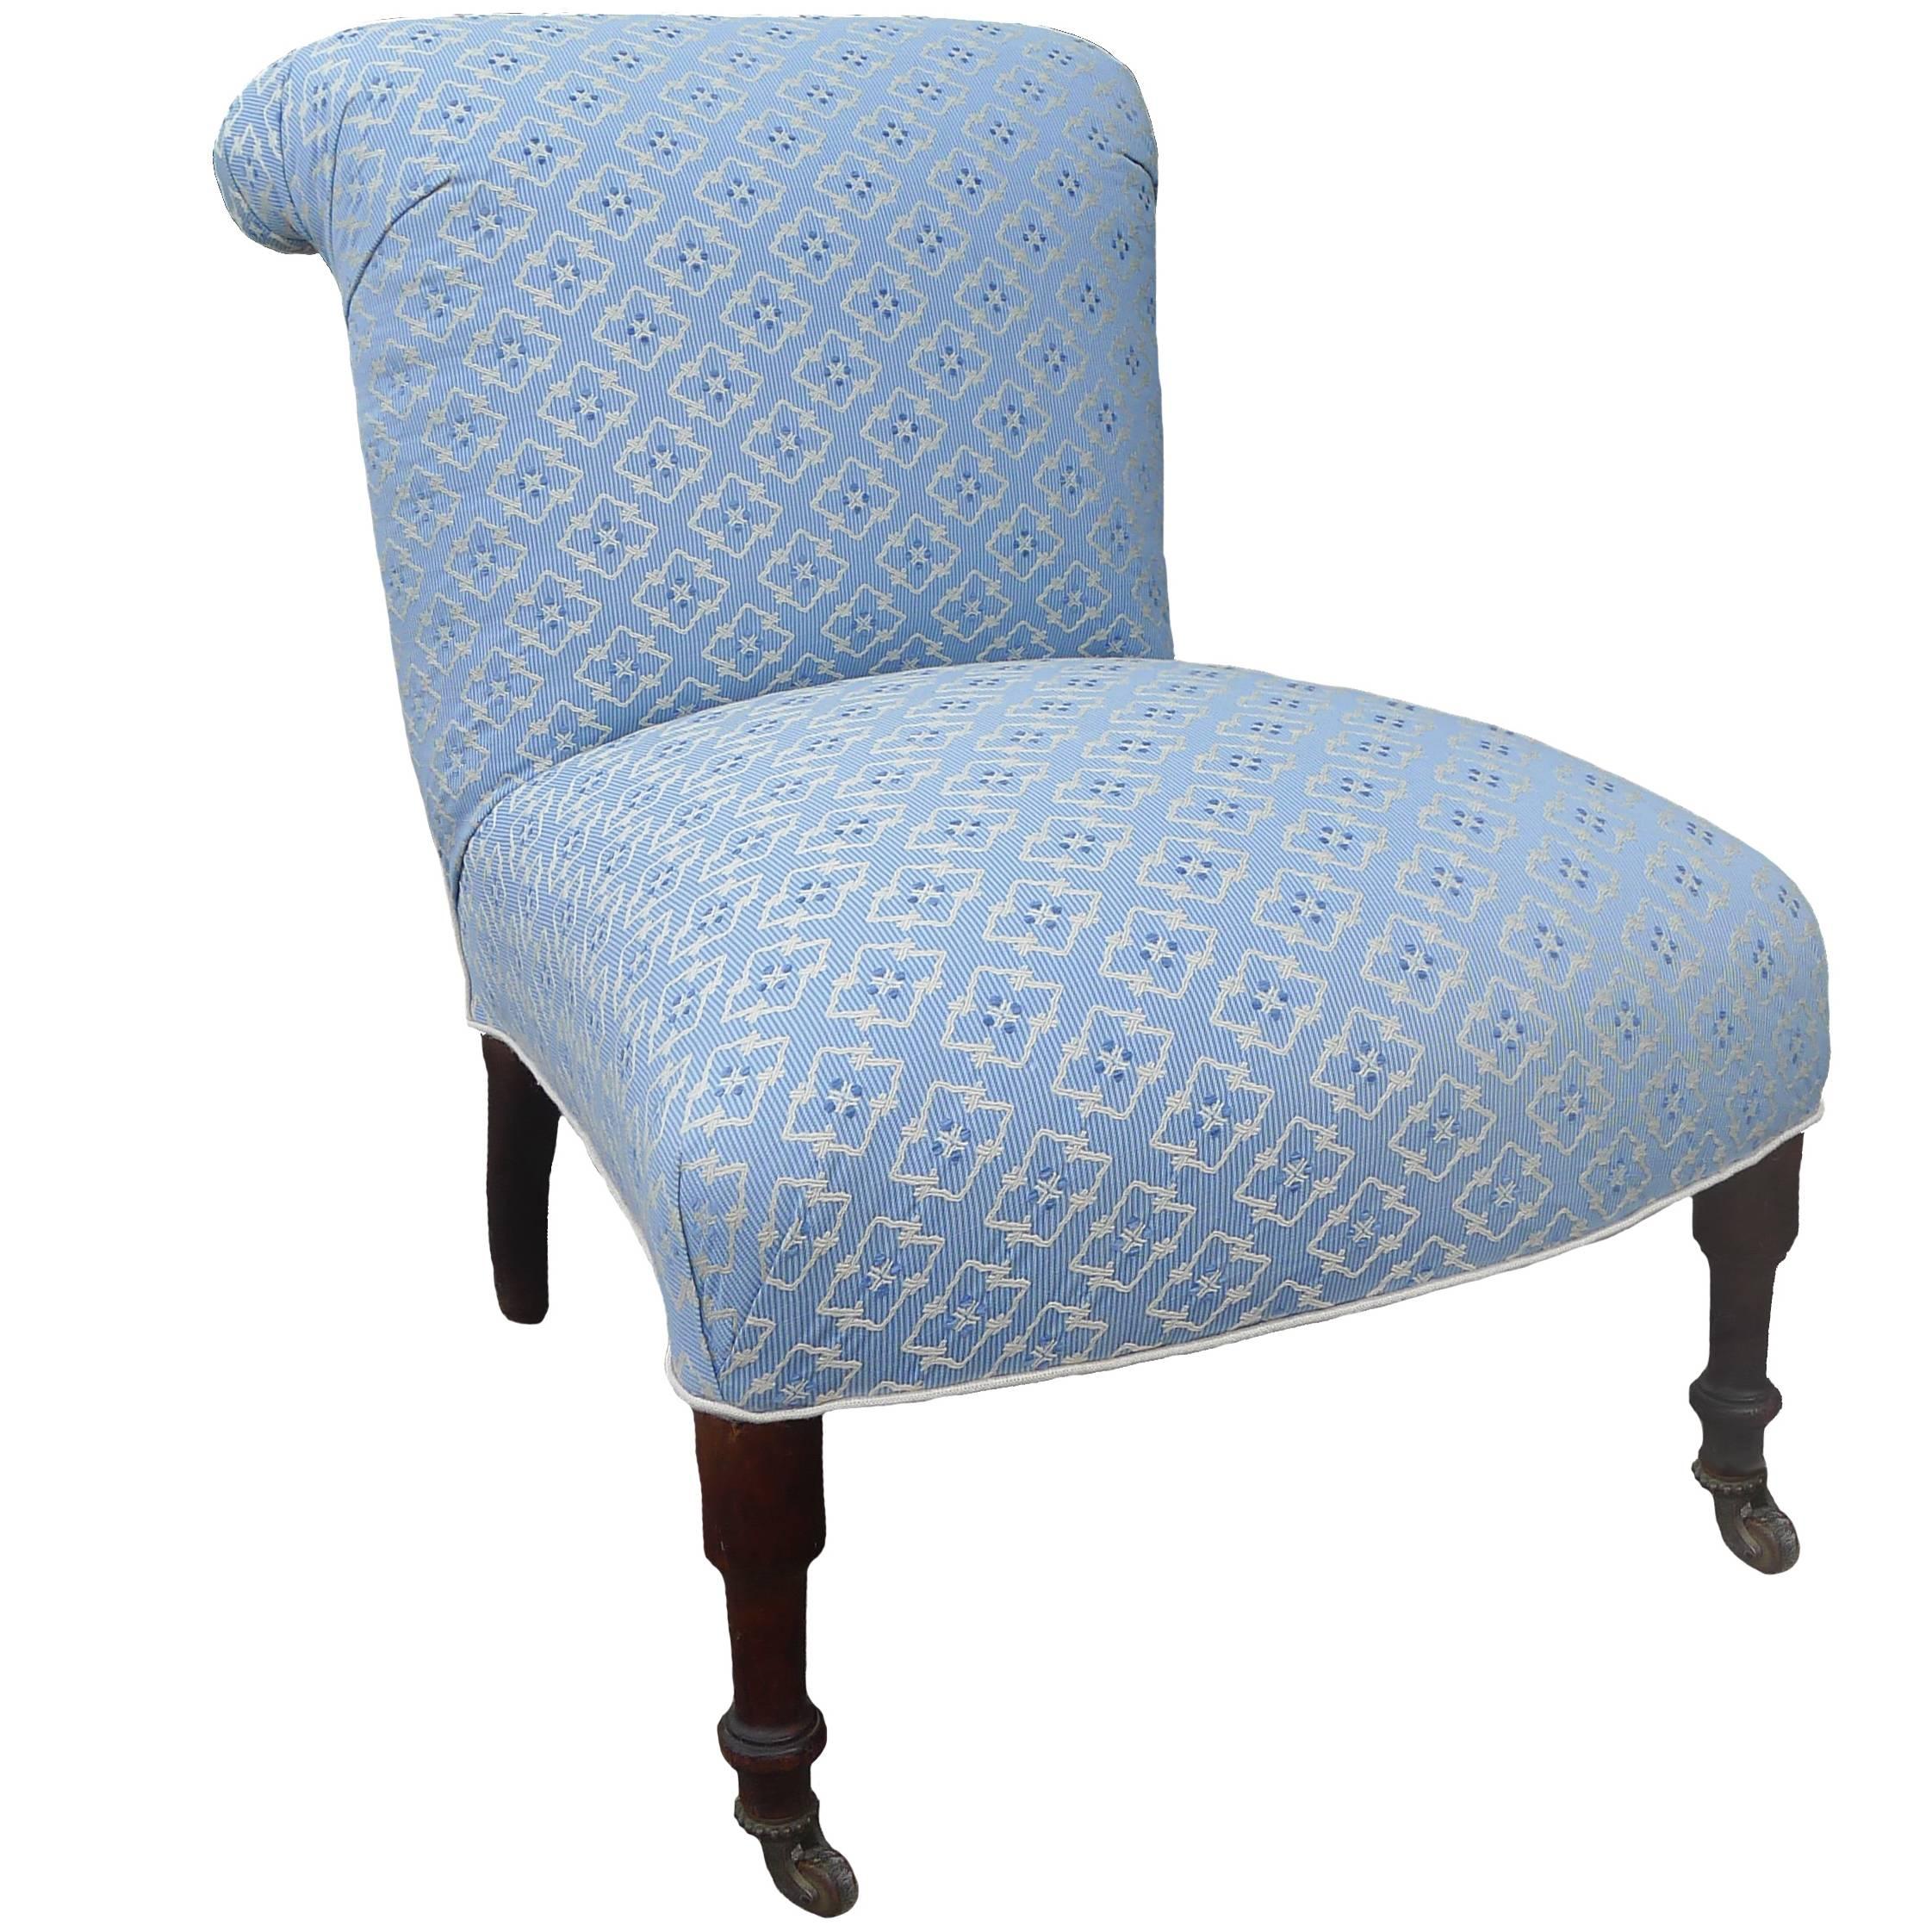 19th Century Napoléon III Newly Upholstered Slipper Chair